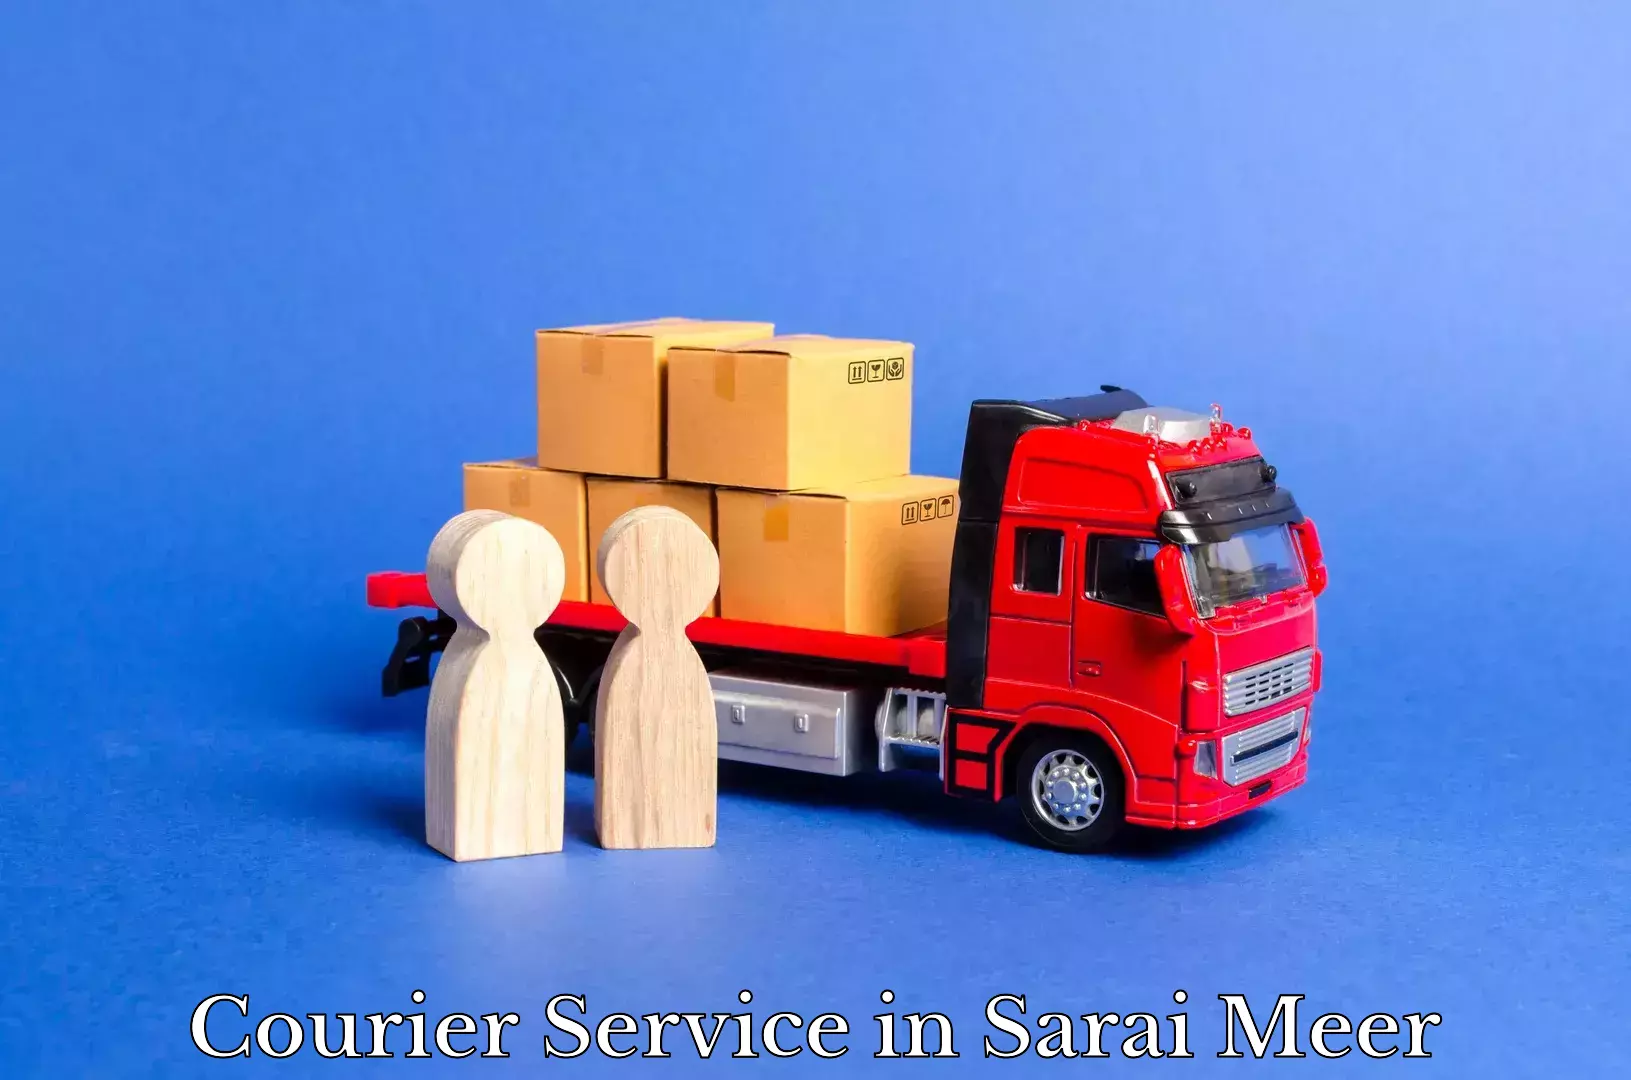 Advanced parcel tracking in Sarai Meer